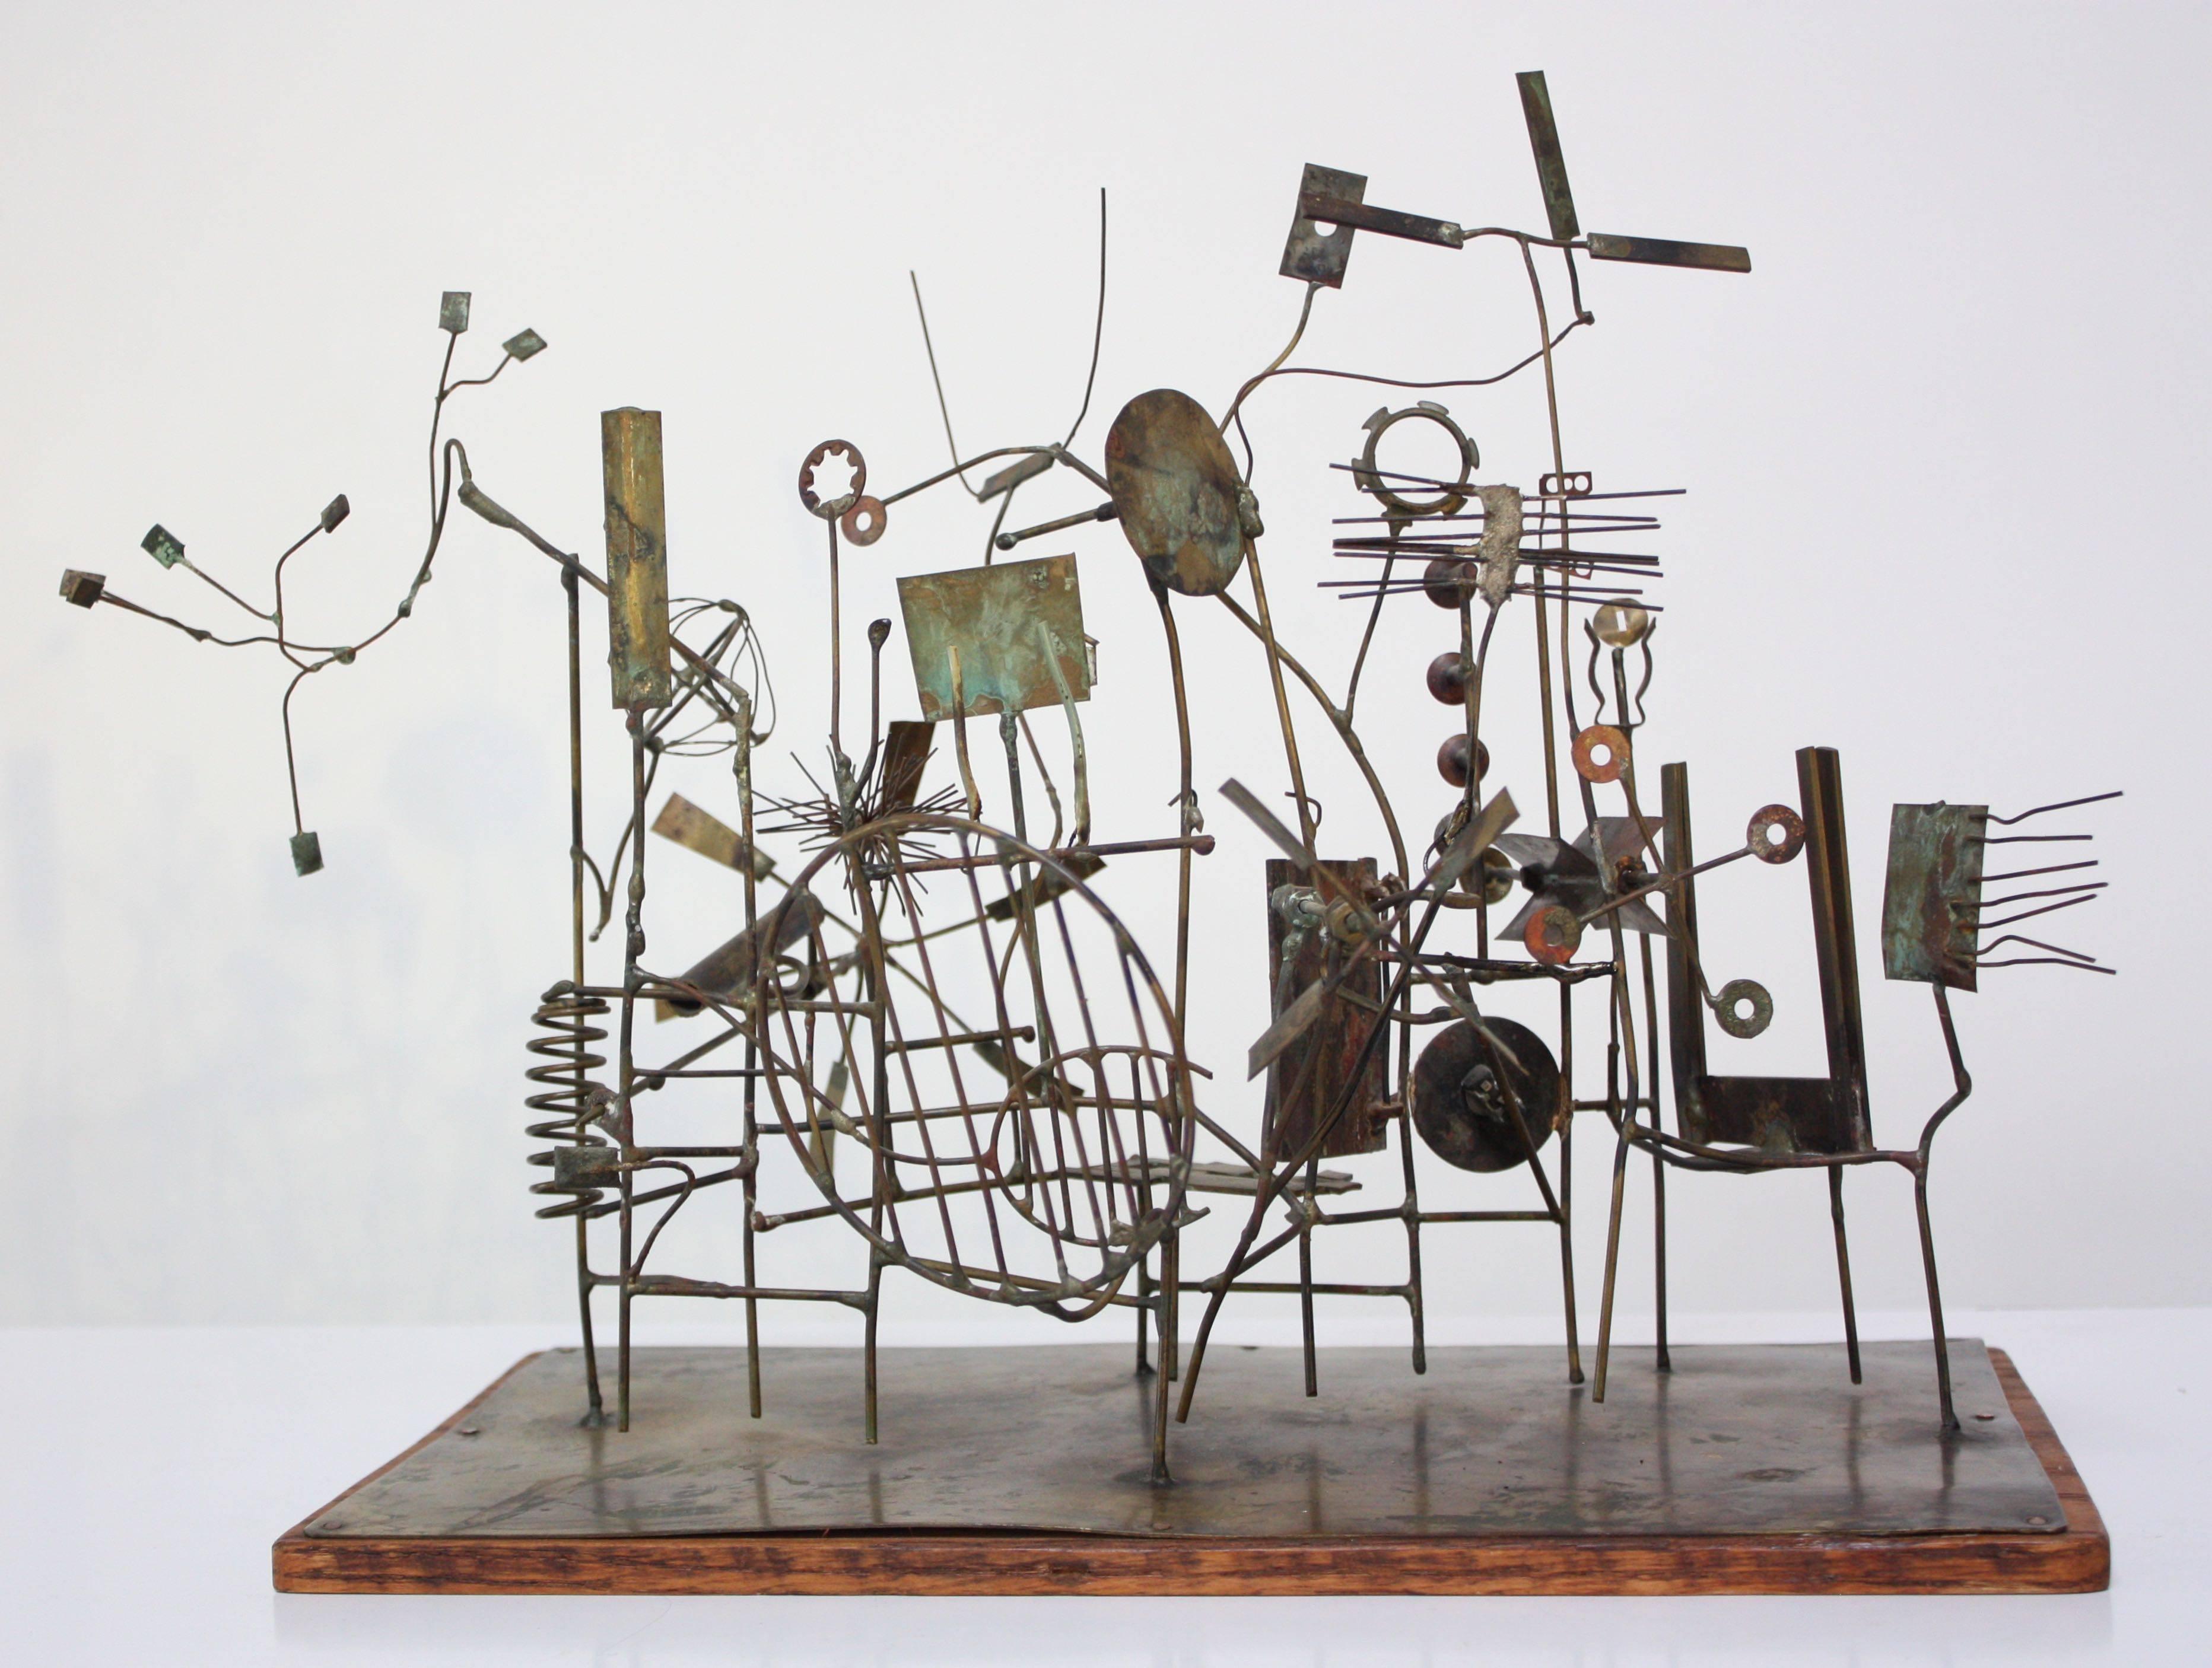 1962 David Hall-Coleman kinetic mixed-metal sculpture entitled, 'Abandoned Carnival Machine.' Extraordinary sculpture composed of torch-cut and soldered brass and copper elements on an oak wood board. Fascinating conversation piece with interactive